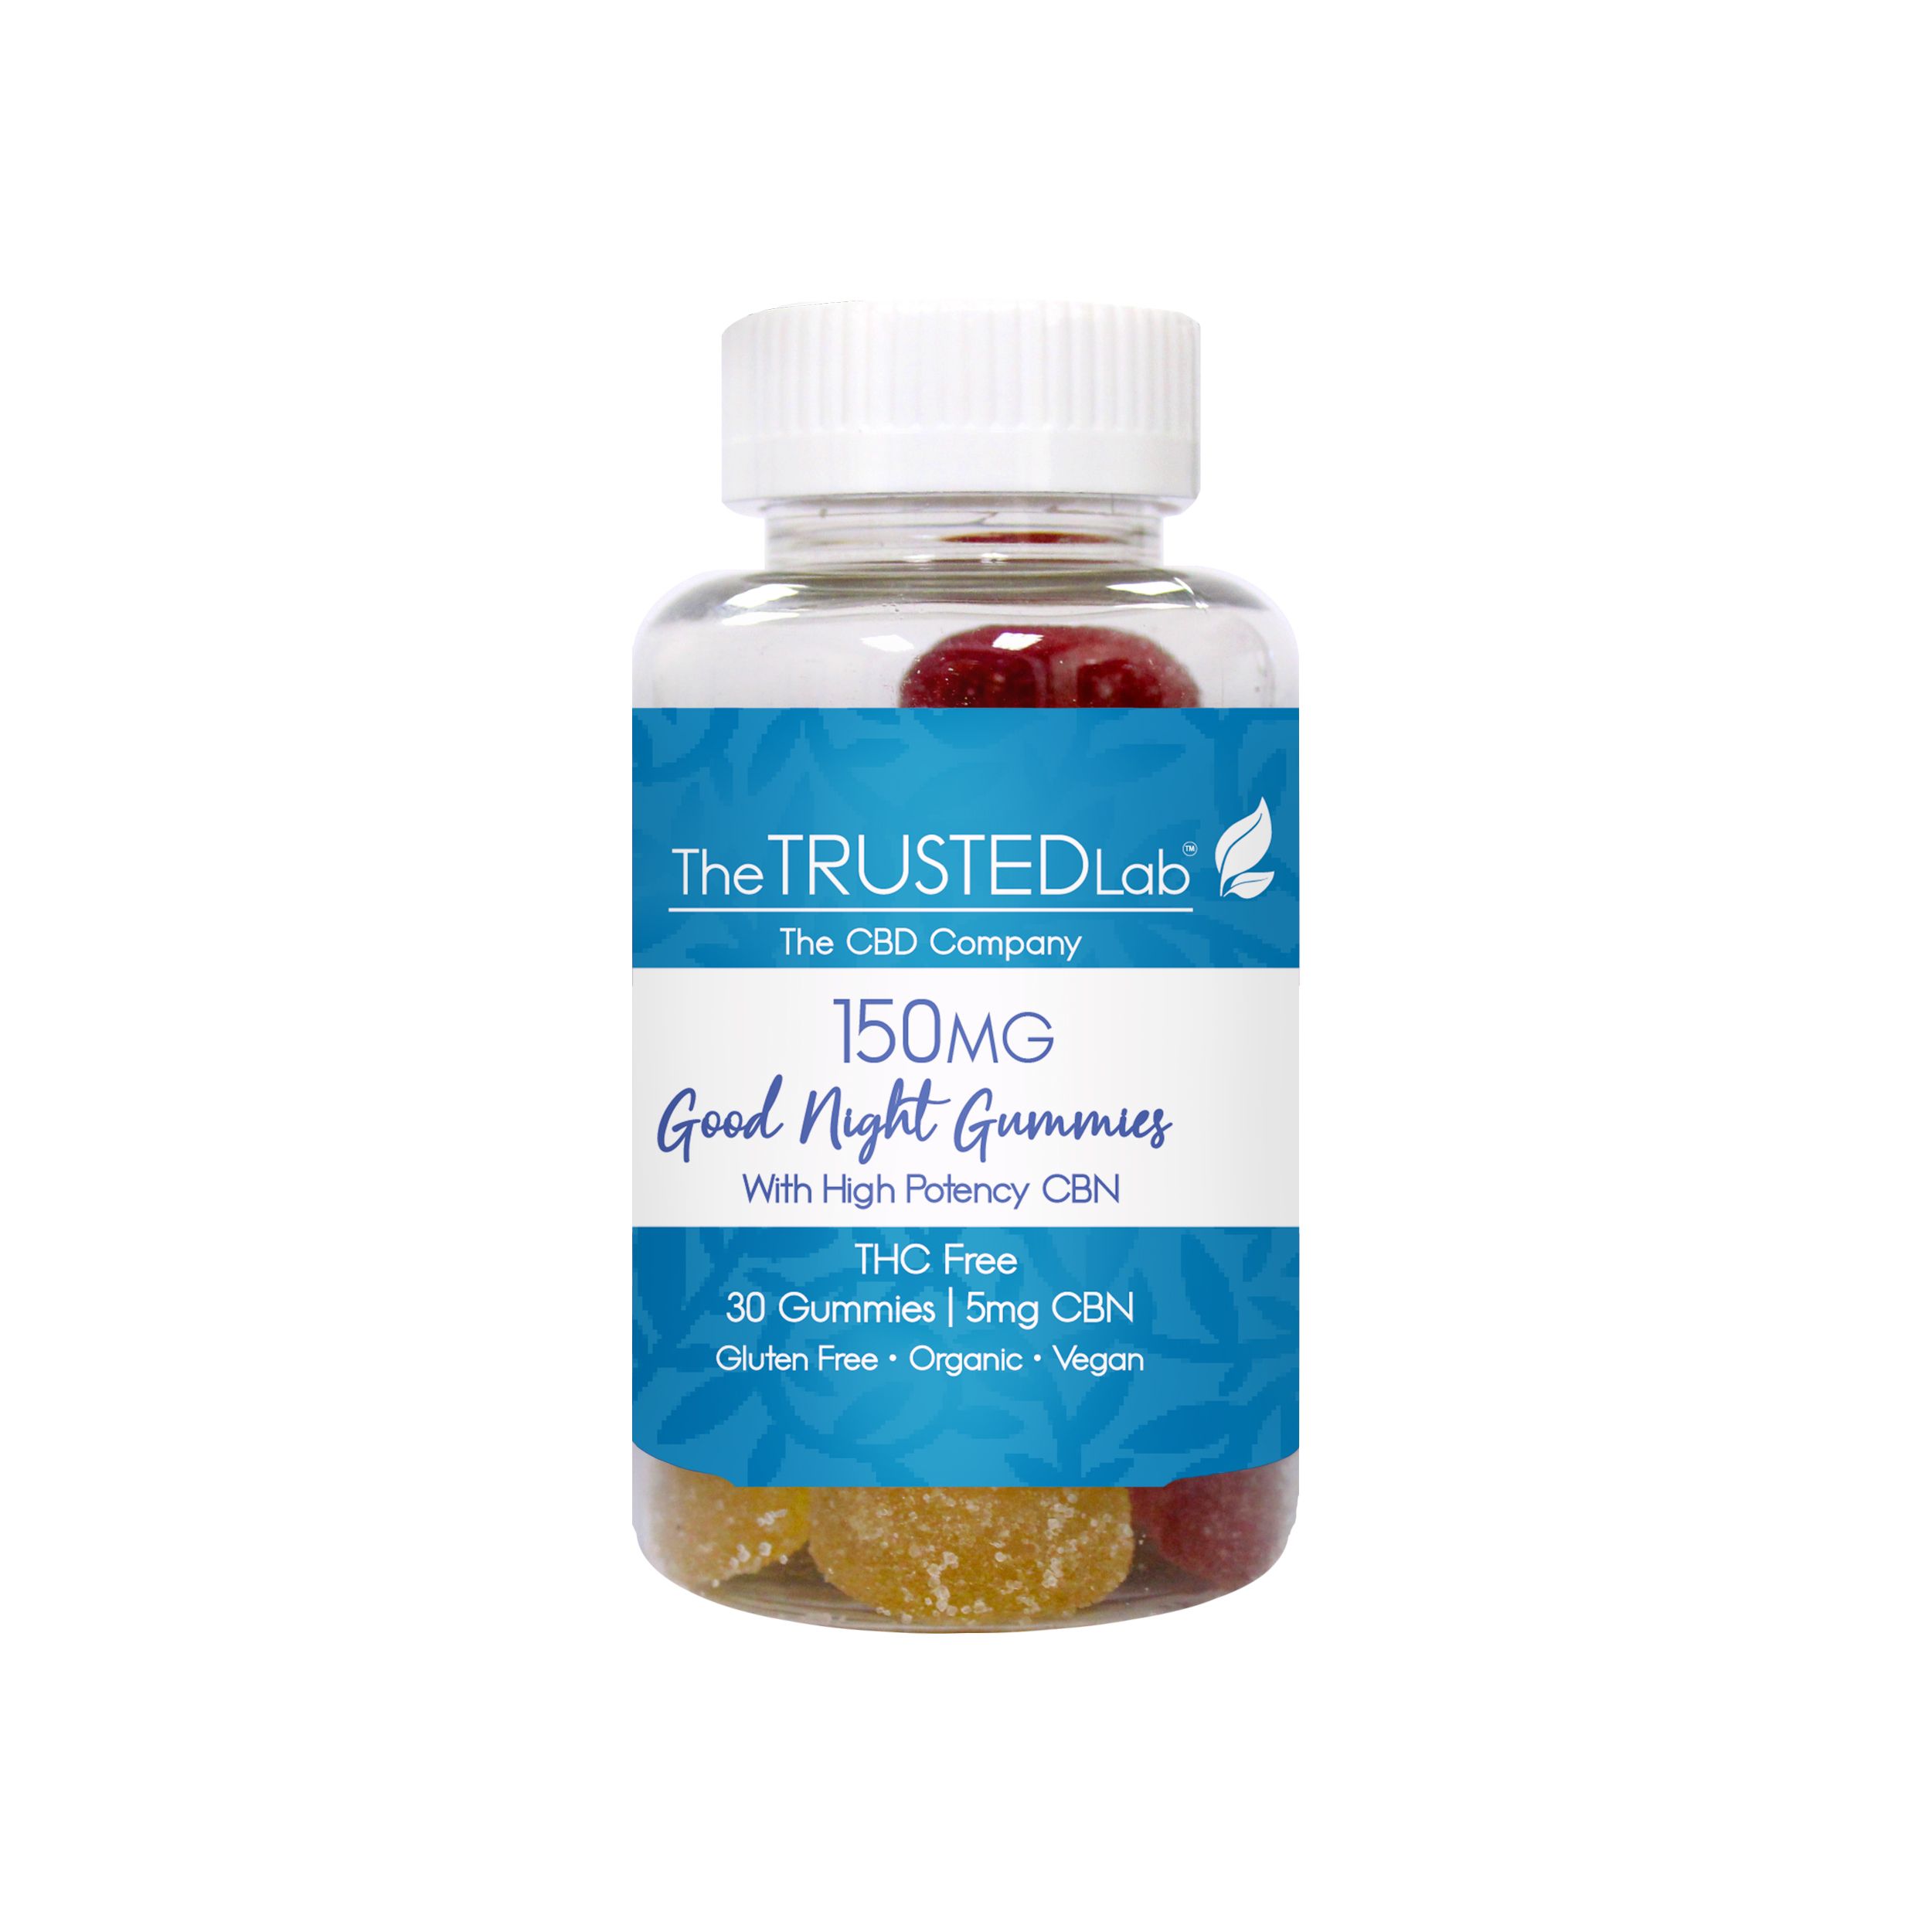 Try our new CBN Gummies for Sleep | The Trusted Lab | The Trusted Lab